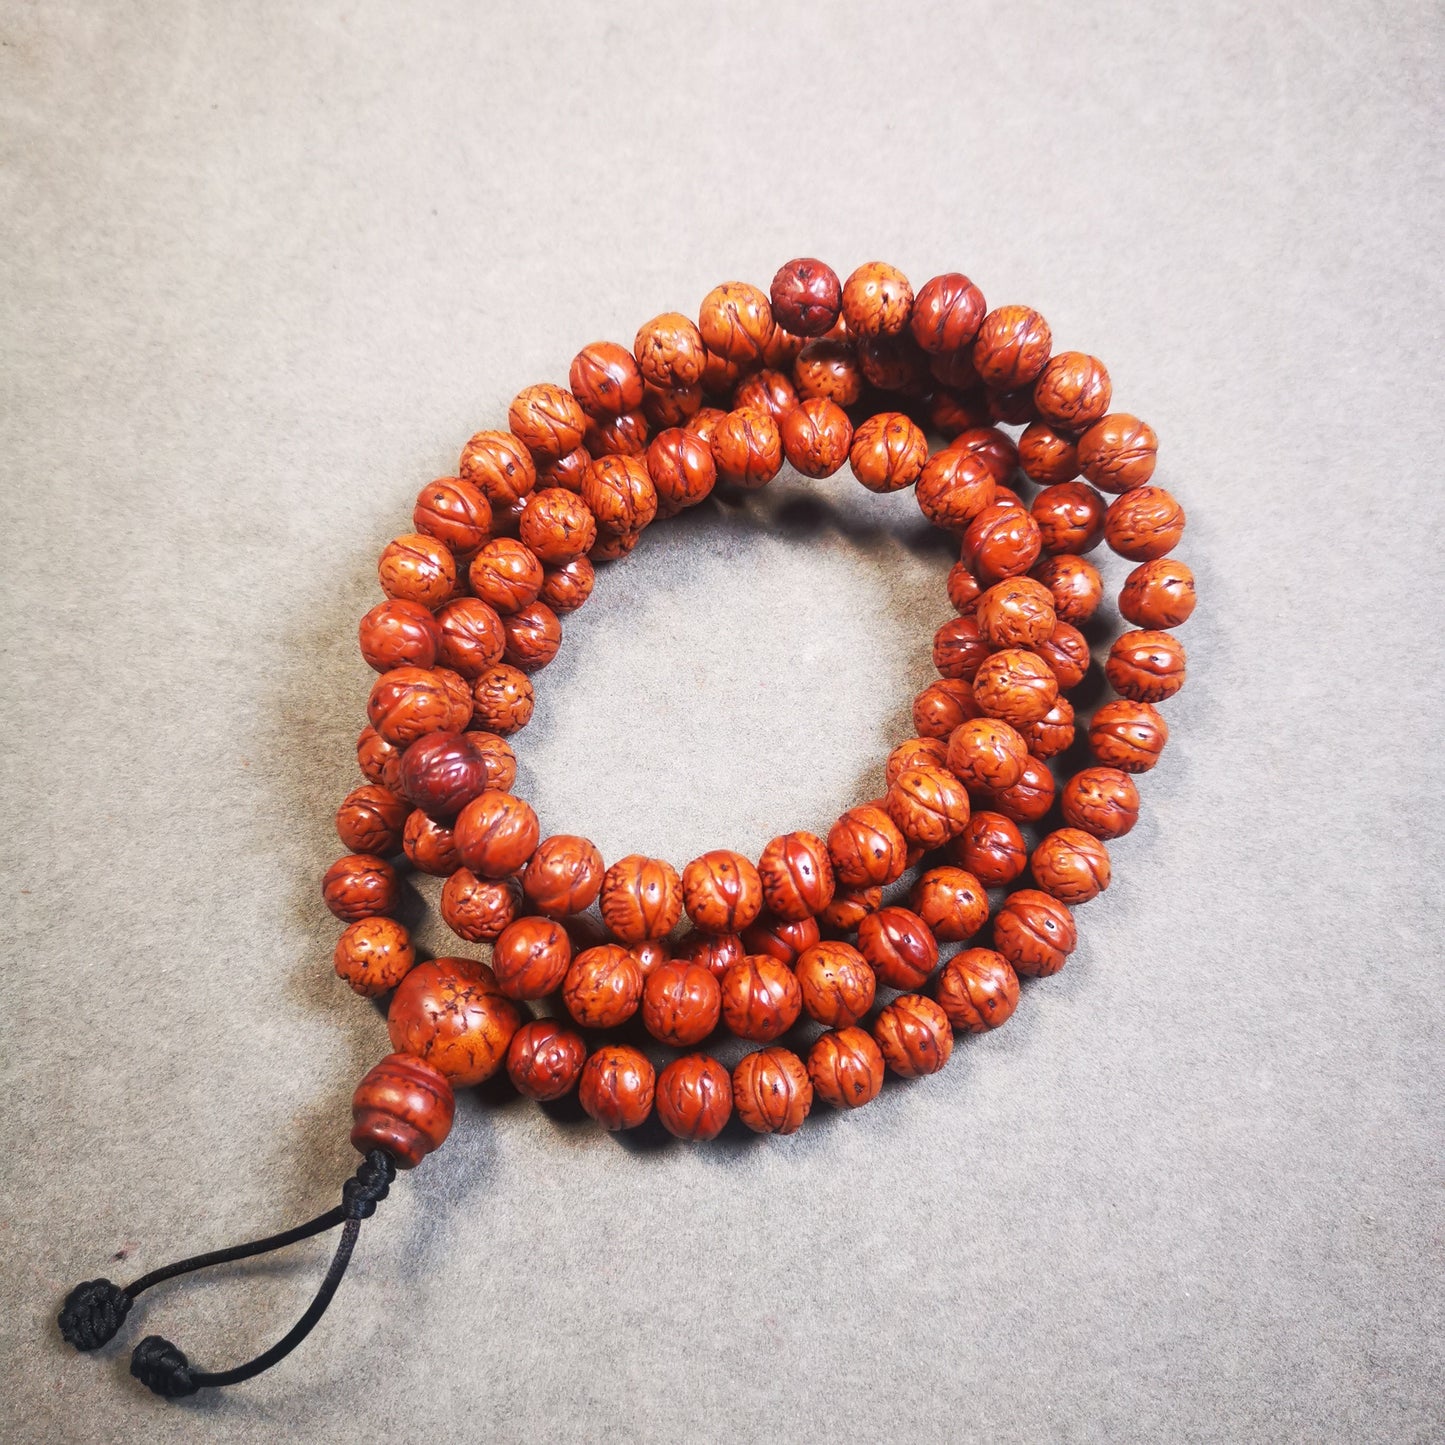 Gandhanra 9mm Old Bodhi Beads Mala Necklace,35.4 inches 108 Prayer Beads for Meditation